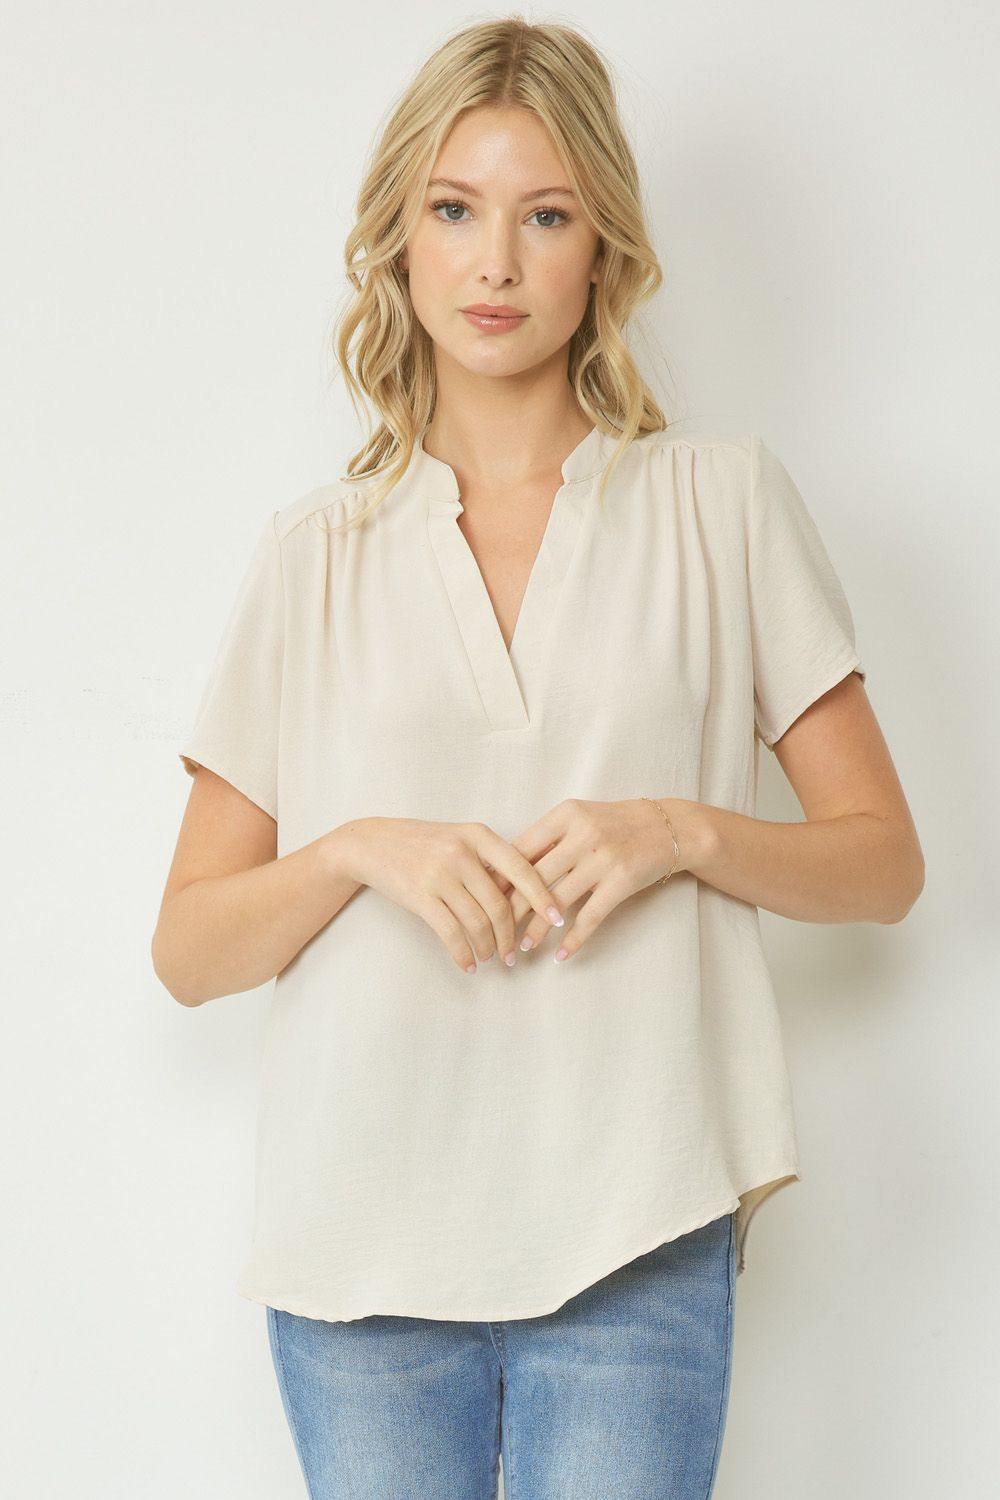 entro brand basic colorful tops Mock Collar Pleat Detailed cream